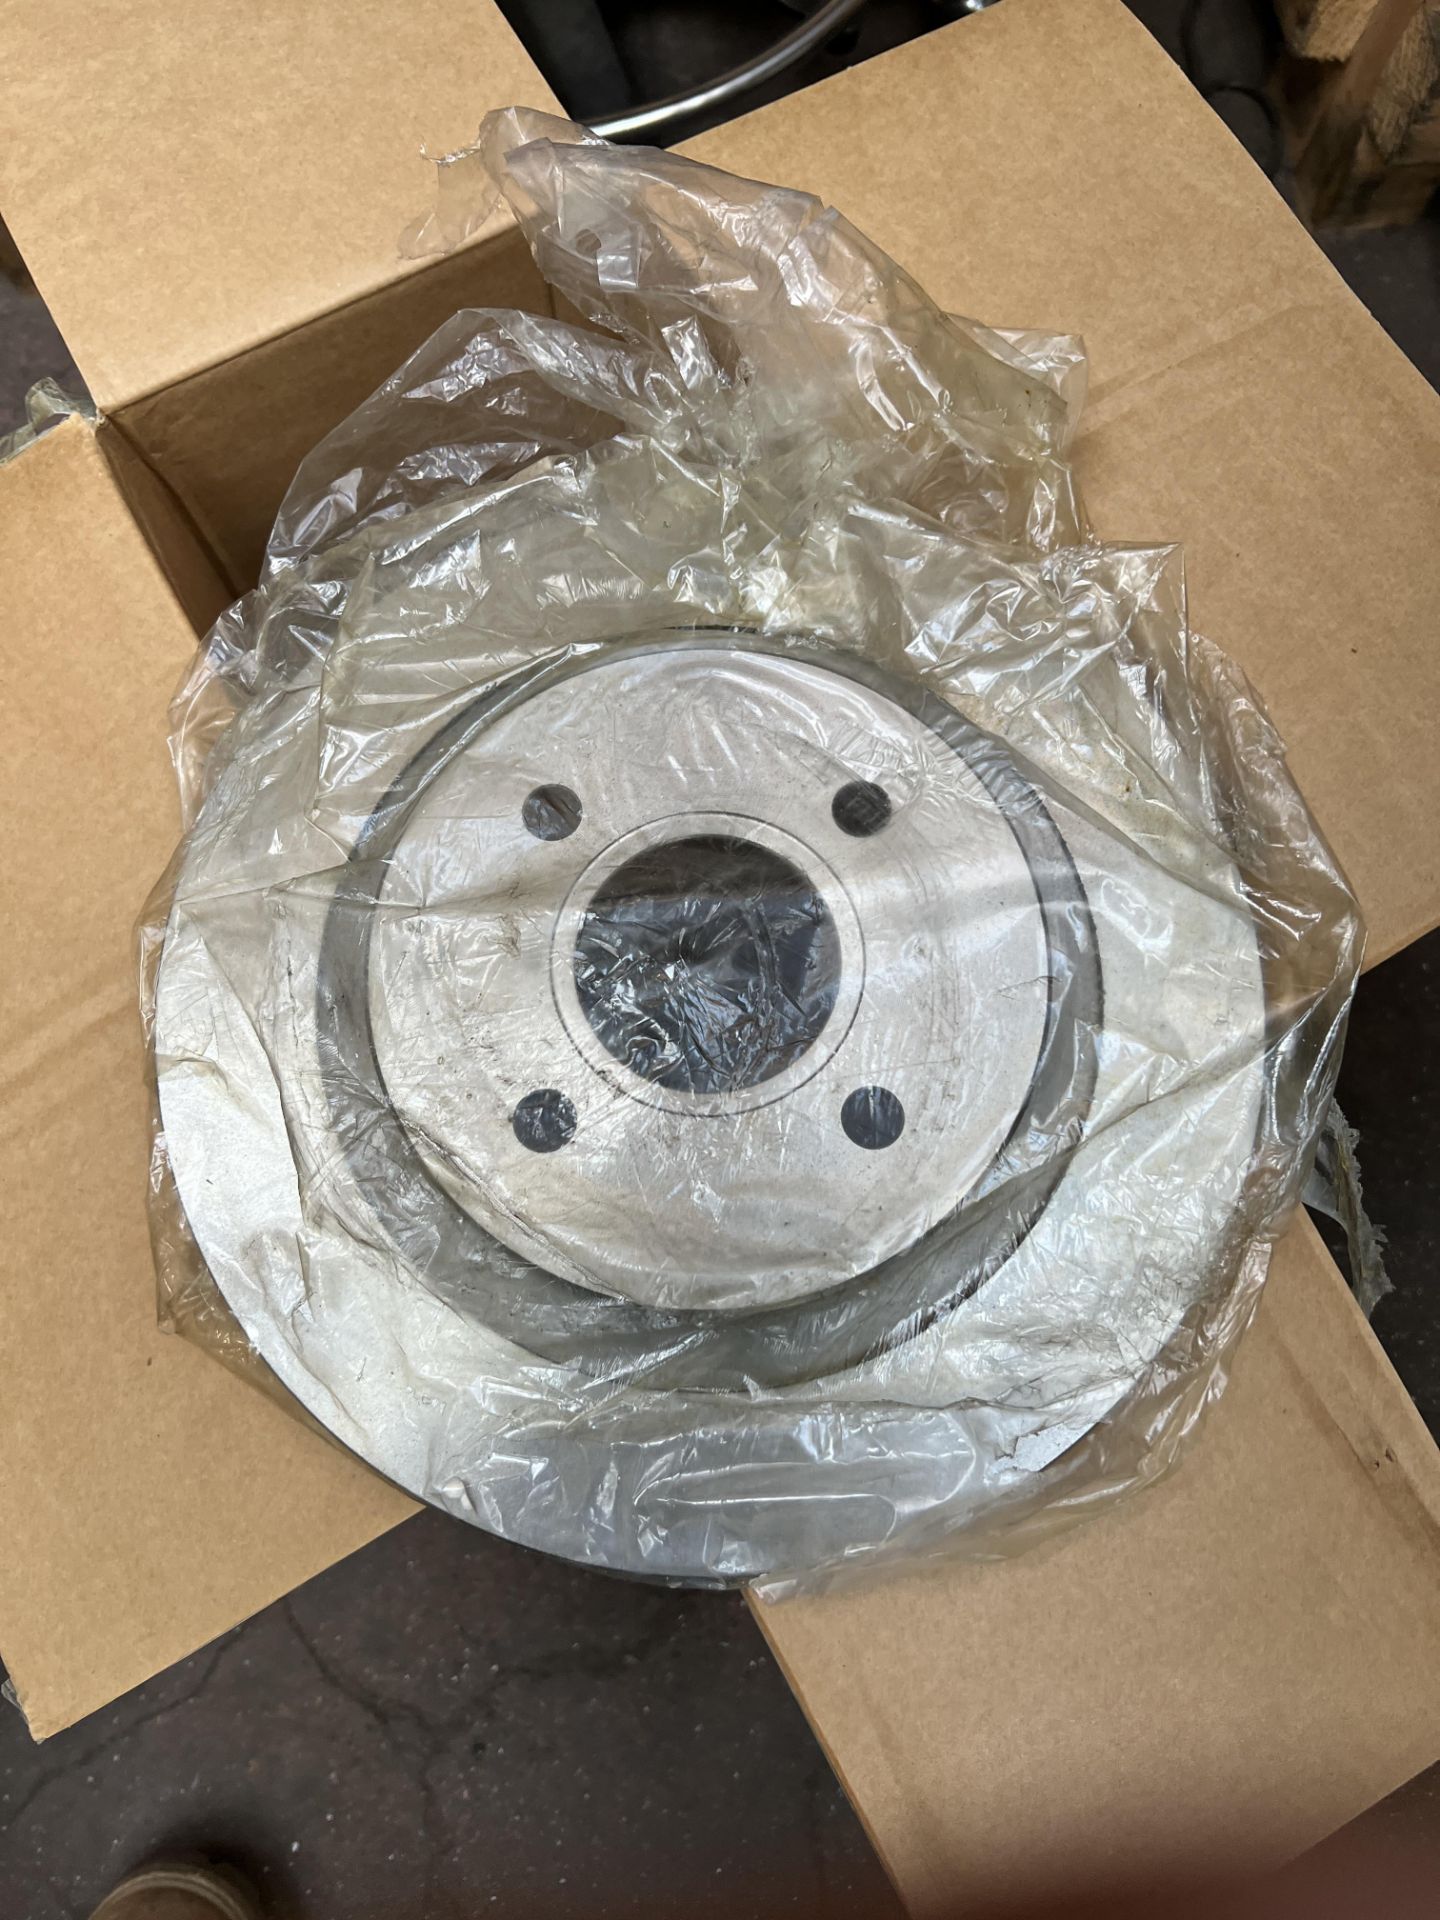 2: Boxed Autonational Vented Brake Discs for Mk1 Ford Focus RS 2.0. OE Number - 1780880/1073756. - Image 3 of 4